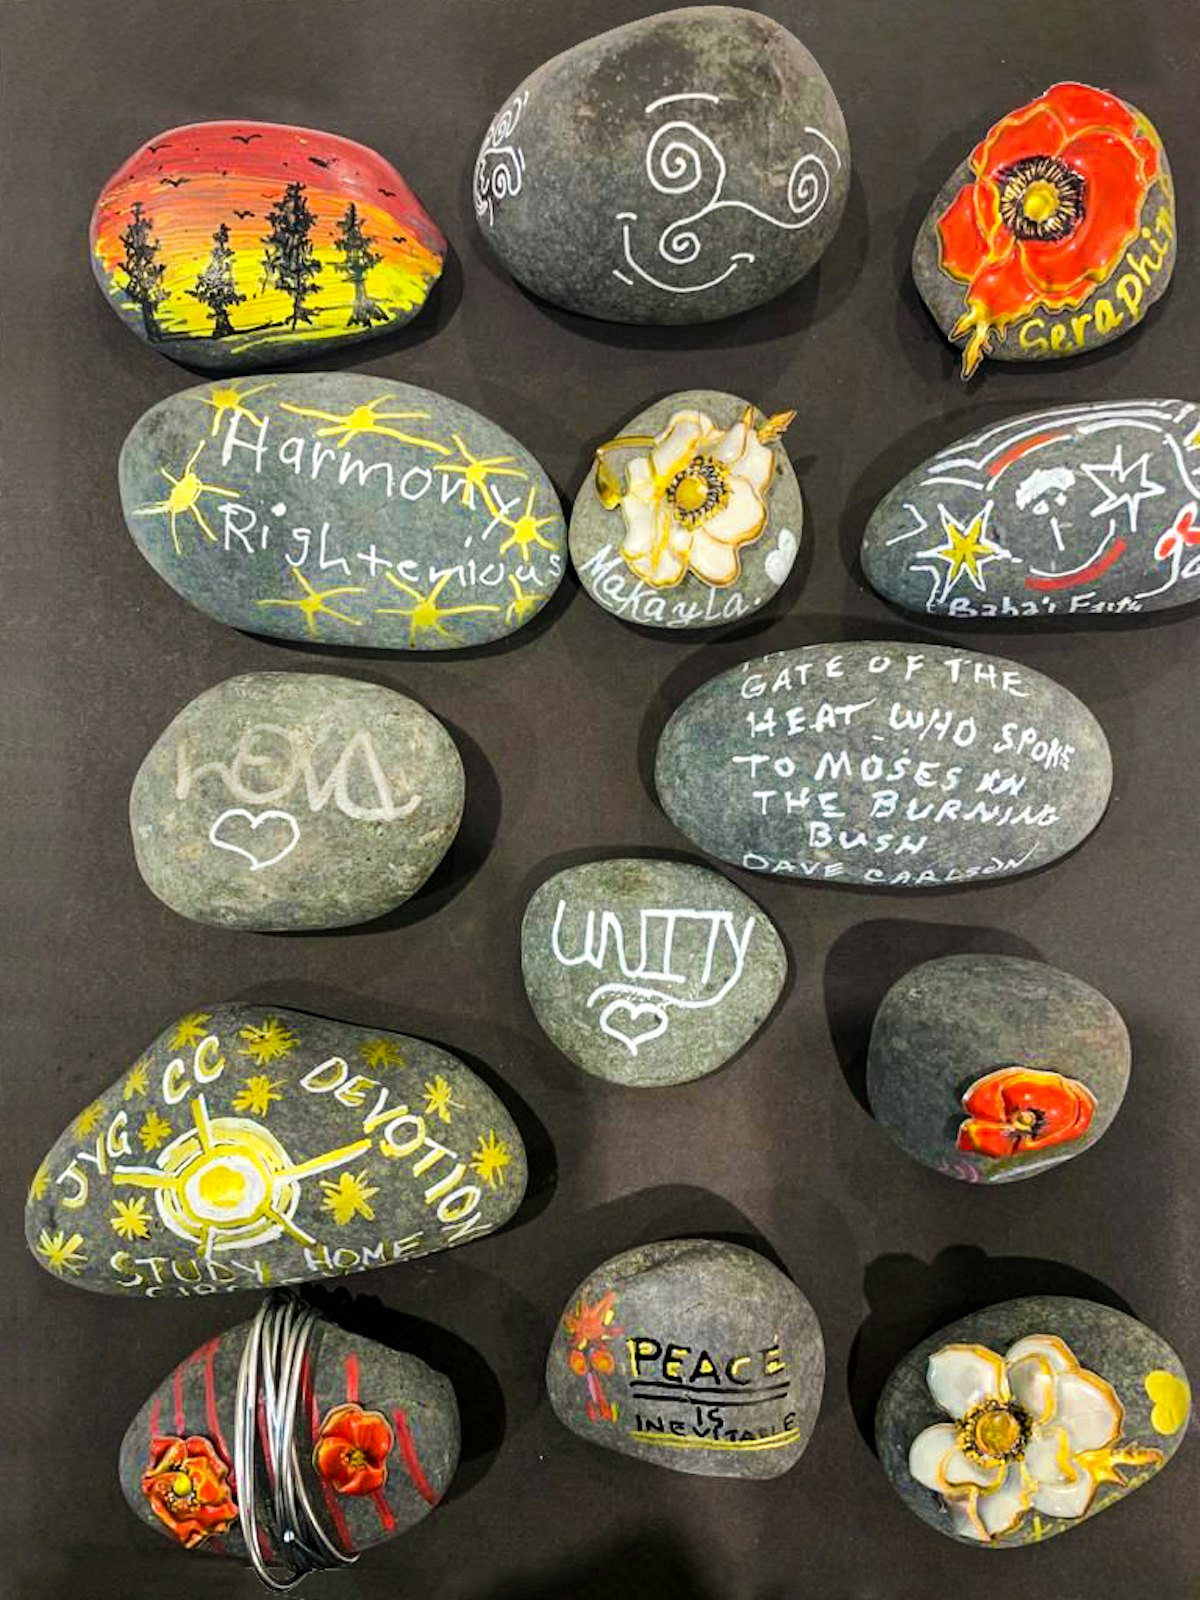 Participants at a conference in the United States decorated rocks with words of hope and floral designs inspired by the Baháʼí writings.